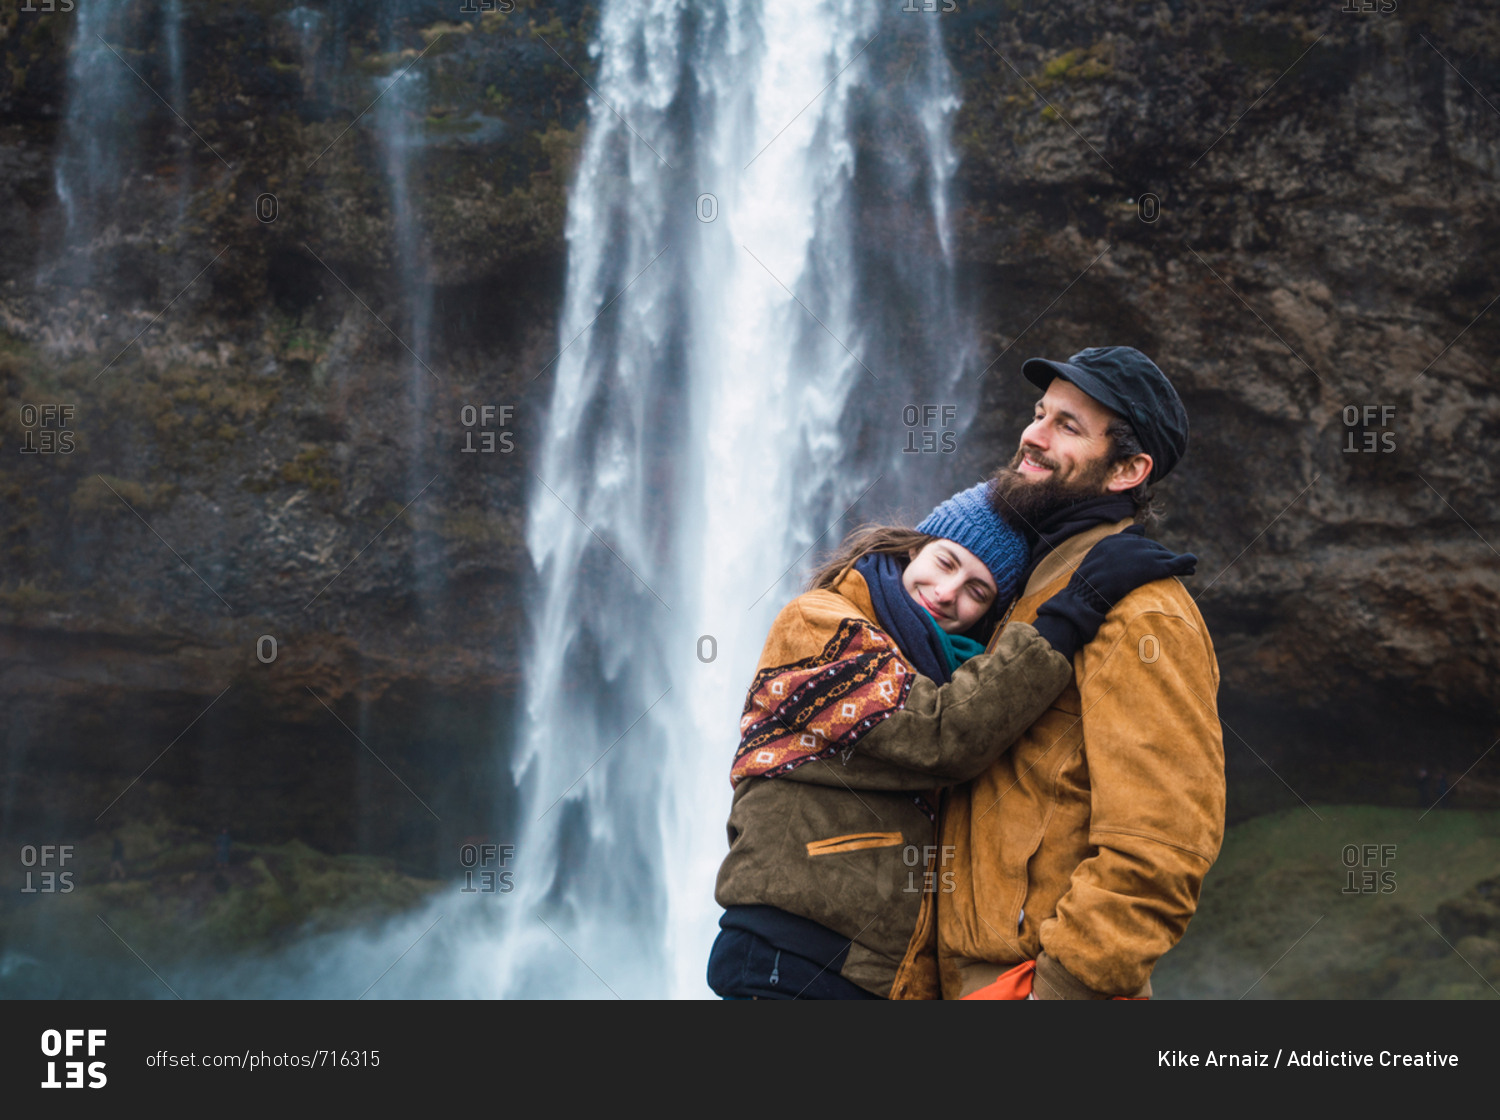 Maine Waterfall Engagement Session - Alexsandra Wiciel Photography